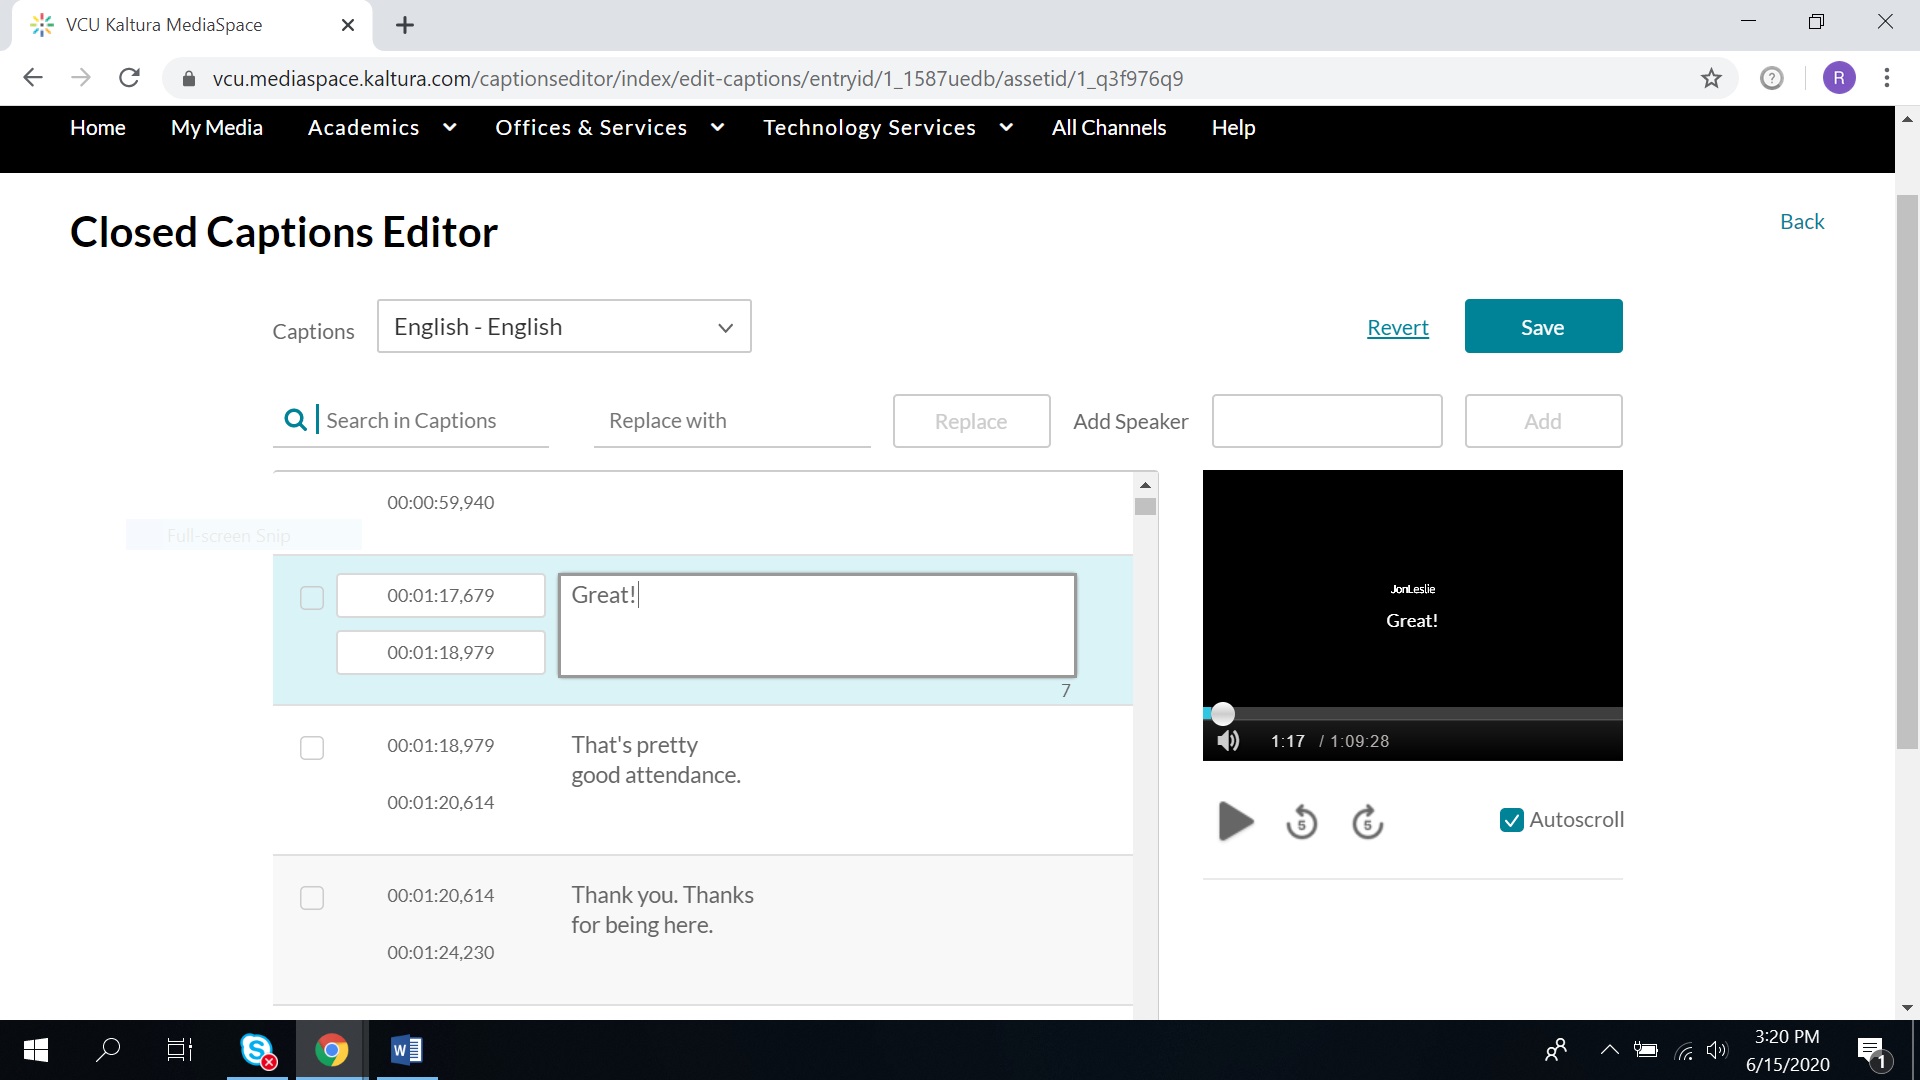 Closed captions editor within Kaltura